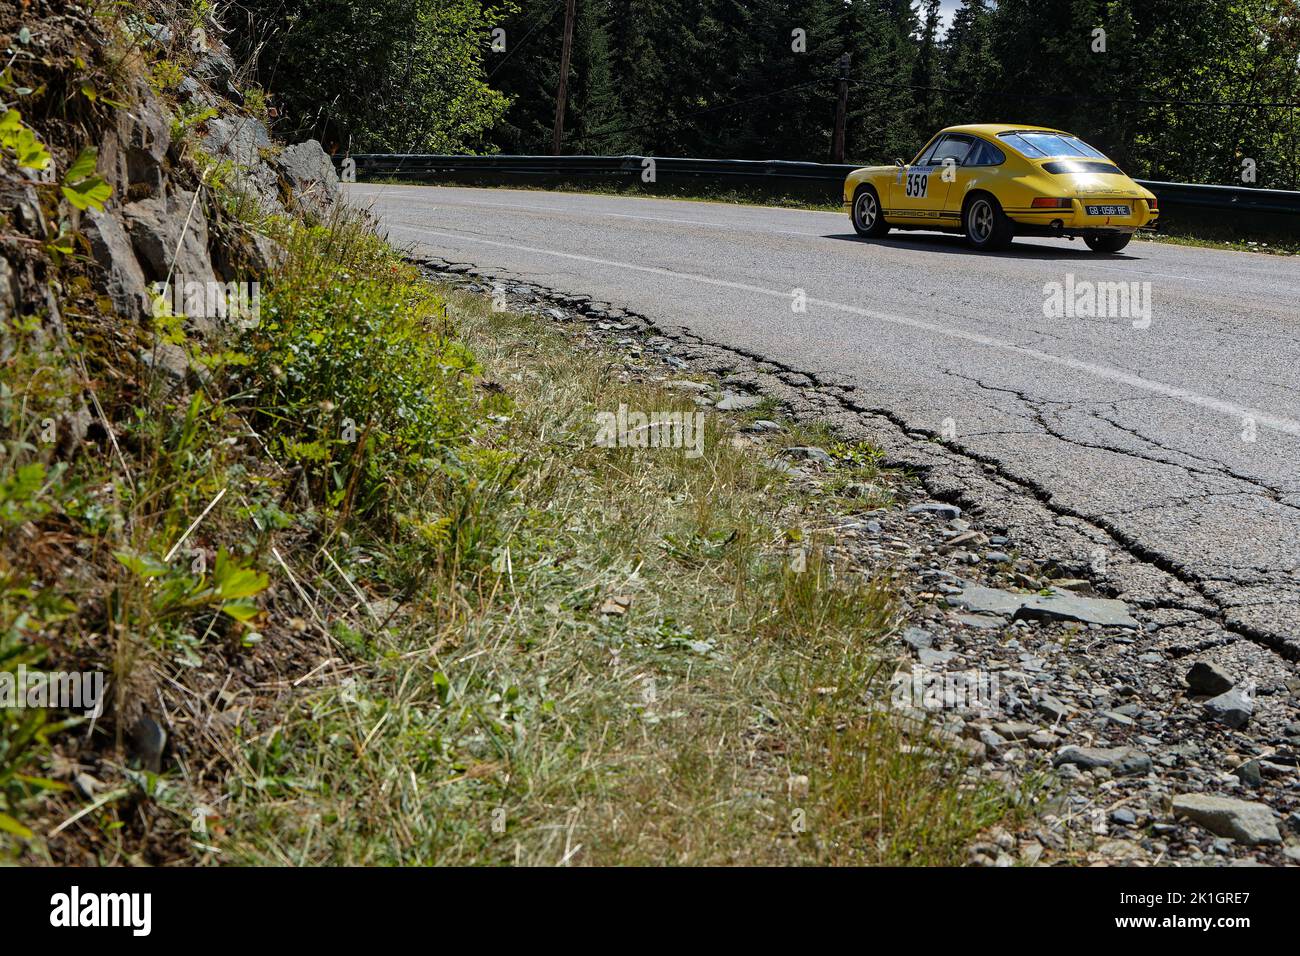 CHAMROUSSE, FRANCE, August 20, 2022 : Old Porsche racing car during Historic Vehicles uphill Chamrousse race. Hillclimbing is a branch of motorsport i Stock Photo